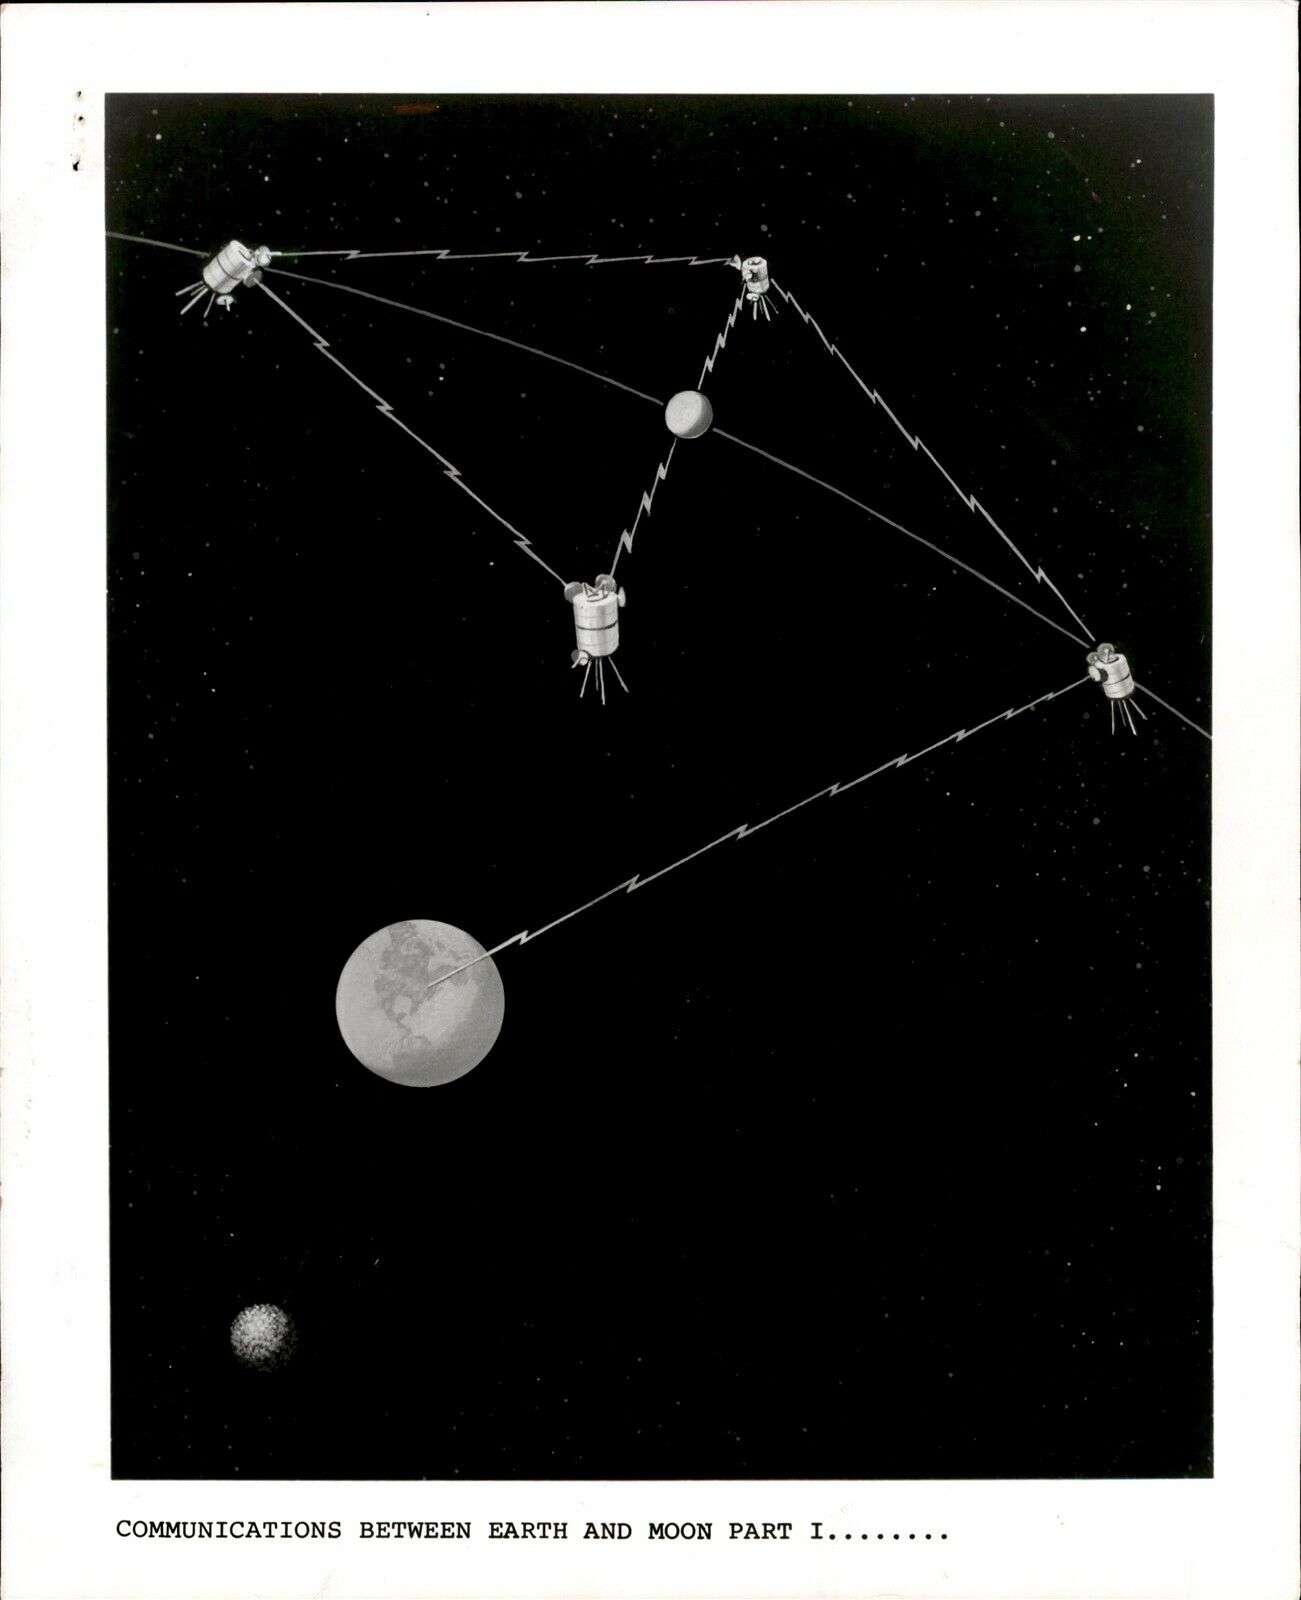 LG933 1970 Original Photo COMMUNICATIONS BETWEEN EARTH AND MOON Satellite Relay